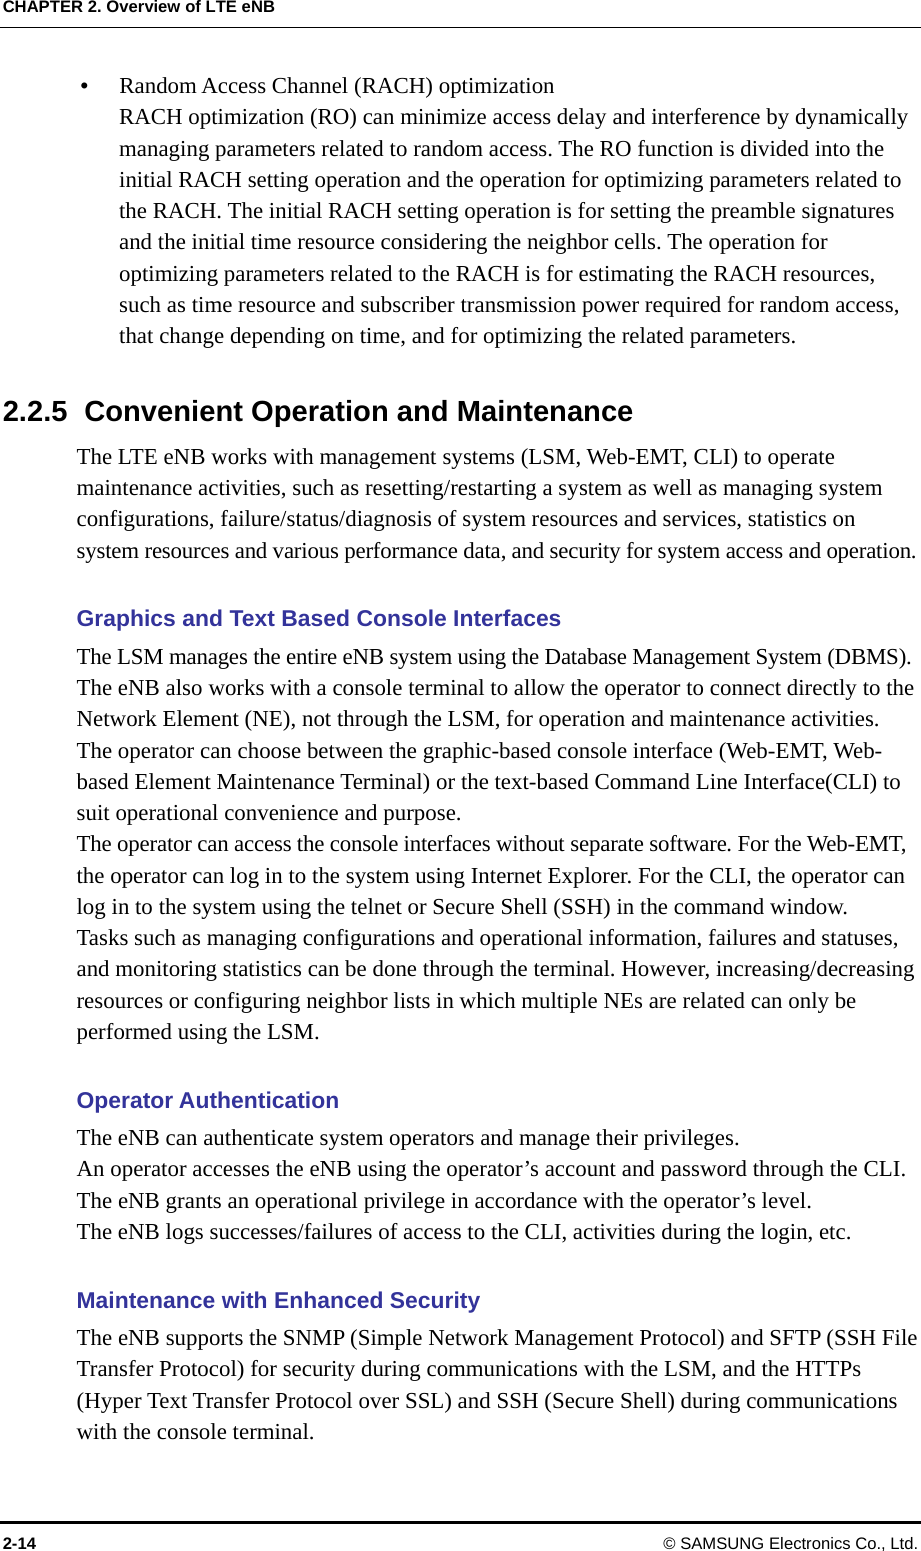 CHAPTER 2. Overview of LTE eNB  Random Access Channel (RACH) optimization RACH optimization (RO) can minimize access delay and interference by dynamically managing parameters related to random access. The RO function is divided into the initial RACH setting operation and the operation for optimizing parameters related to the RACH. The initial RACH setting operation is for setting the preamble signatures and the initial time resource considering the neighbor cells. The operation for optimizing parameters related to the RACH is for estimating the RACH resources, such as time resource and subscriber transmission power required for random access, that change depending on time, and for optimizing the related parameters.  2.2.5  Convenient Operation and Maintenance The LTE eNB works with management systems (LSM, Web-EMT, CLI) to operate maintenance activities, such as resetting/restarting a system as well as managing system configurations, failure/status/diagnosis of system resources and services, statistics on system resources and various performance data, and security for system access and operation.  Graphics and Text Based Console Interfaces The LSM manages the entire eNB system using the Database Management System (DBMS).   The eNB also works with a console terminal to allow the operator to connect directly to the Network Element (NE), not through the LSM, for operation and maintenance activities. The operator can choose between the graphic-based console interface (Web-EMT, Web-based Element Maintenance Terminal) or the text-based Command Line Interface(CLI) to suit operational convenience and purpose. The operator can access the console interfaces without separate software. For the Web-EMT, the operator can log in to the system using Internet Explorer. For the CLI, the operator can log in to the system using the telnet or Secure Shell (SSH) in the command window. Tasks such as managing configurations and operational information, failures and statuses, and monitoring statistics can be done through the terminal. However, increasing/decreasing resources or configuring neighbor lists in which multiple NEs are related can only be performed using the LSM.  Operator Authentication The eNB can authenticate system operators and manage their privileges.   An operator accesses the eNB using the operator’s account and password through the CLI. The eNB grants an operational privilege in accordance with the operator’s level. The eNB logs successes/failures of access to the CLI, activities during the login, etc.  Maintenance with Enhanced Security The eNB supports the SNMP (Simple Network Management Protocol) and SFTP (SSH File Transfer Protocol) for security during communications with the LSM, and the HTTPs (Hyper Text Transfer Protocol over SSL) and SSH (Secure Shell) during communications with the console terminal. 2-14 © SAMSUNG Electronics Co., Ltd. 